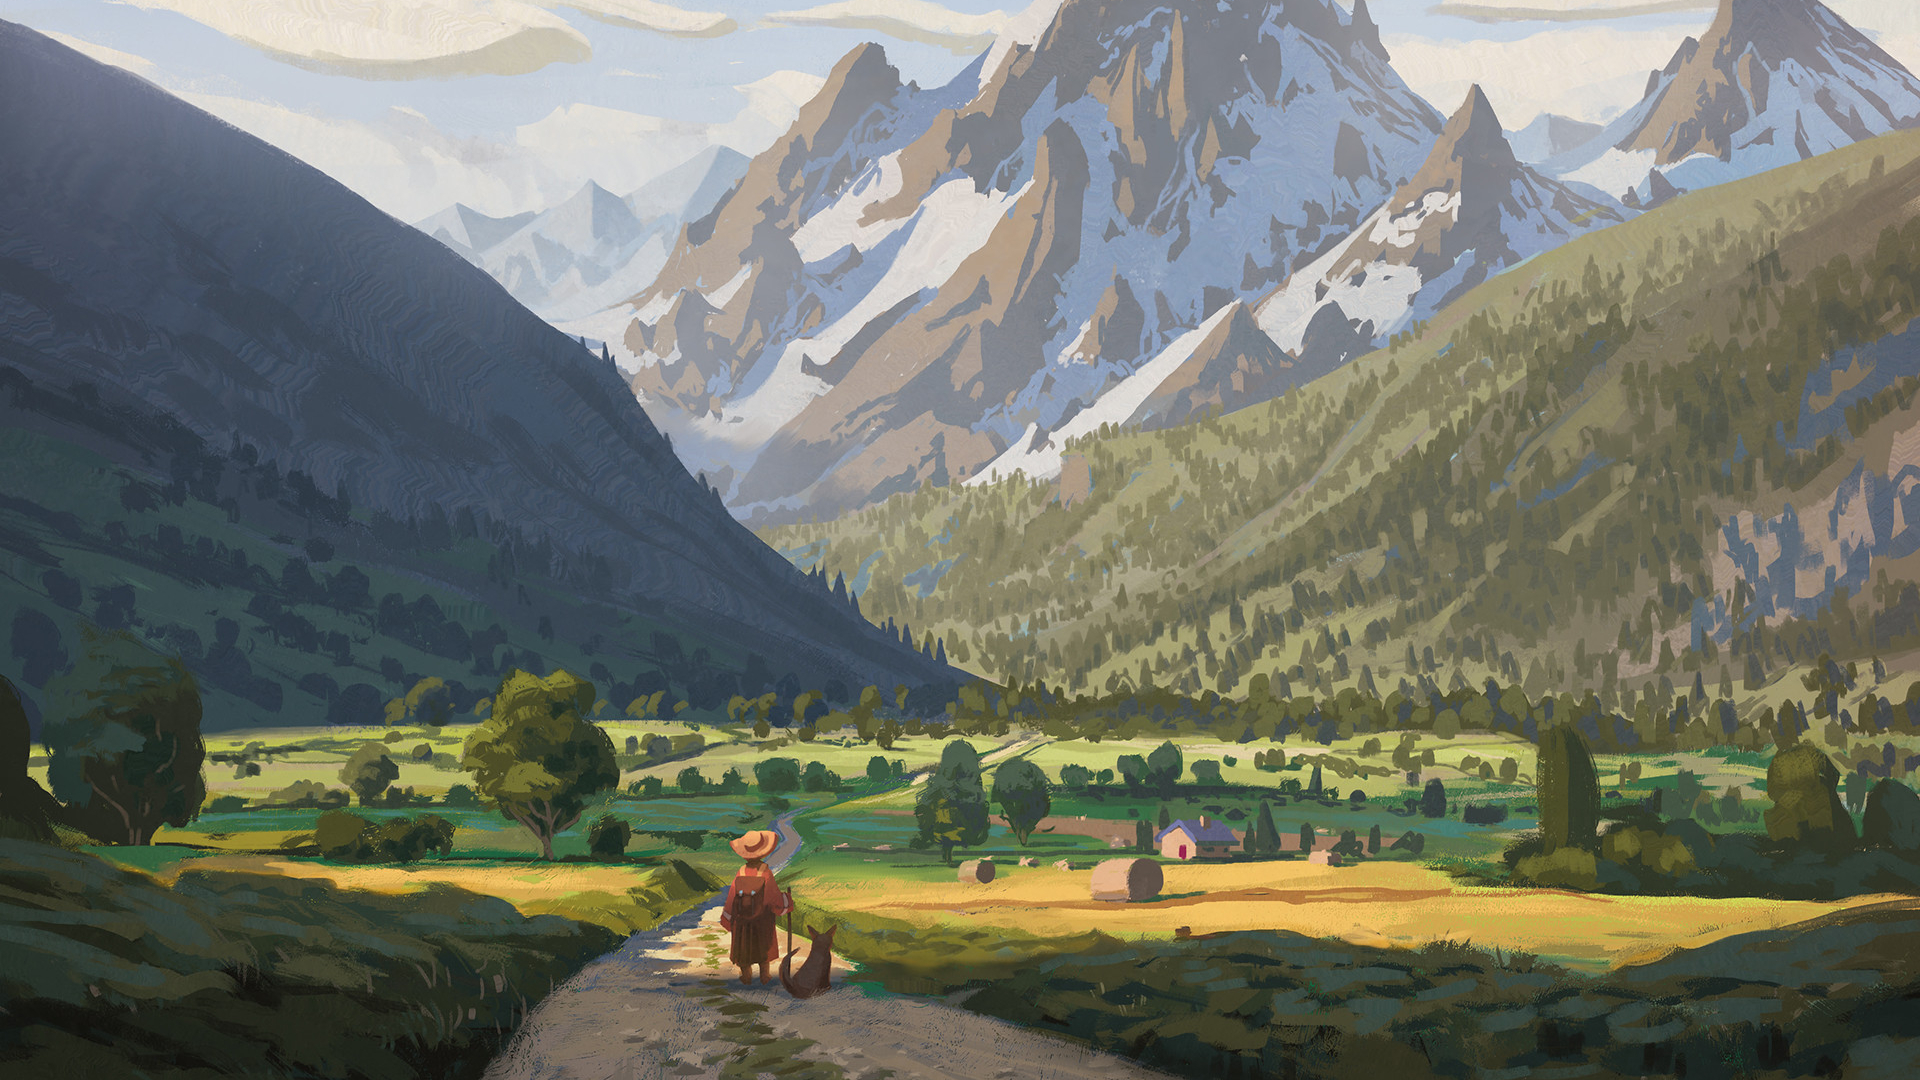 Anime 1920x1080 anime mountains landscape canyon snow covered dog